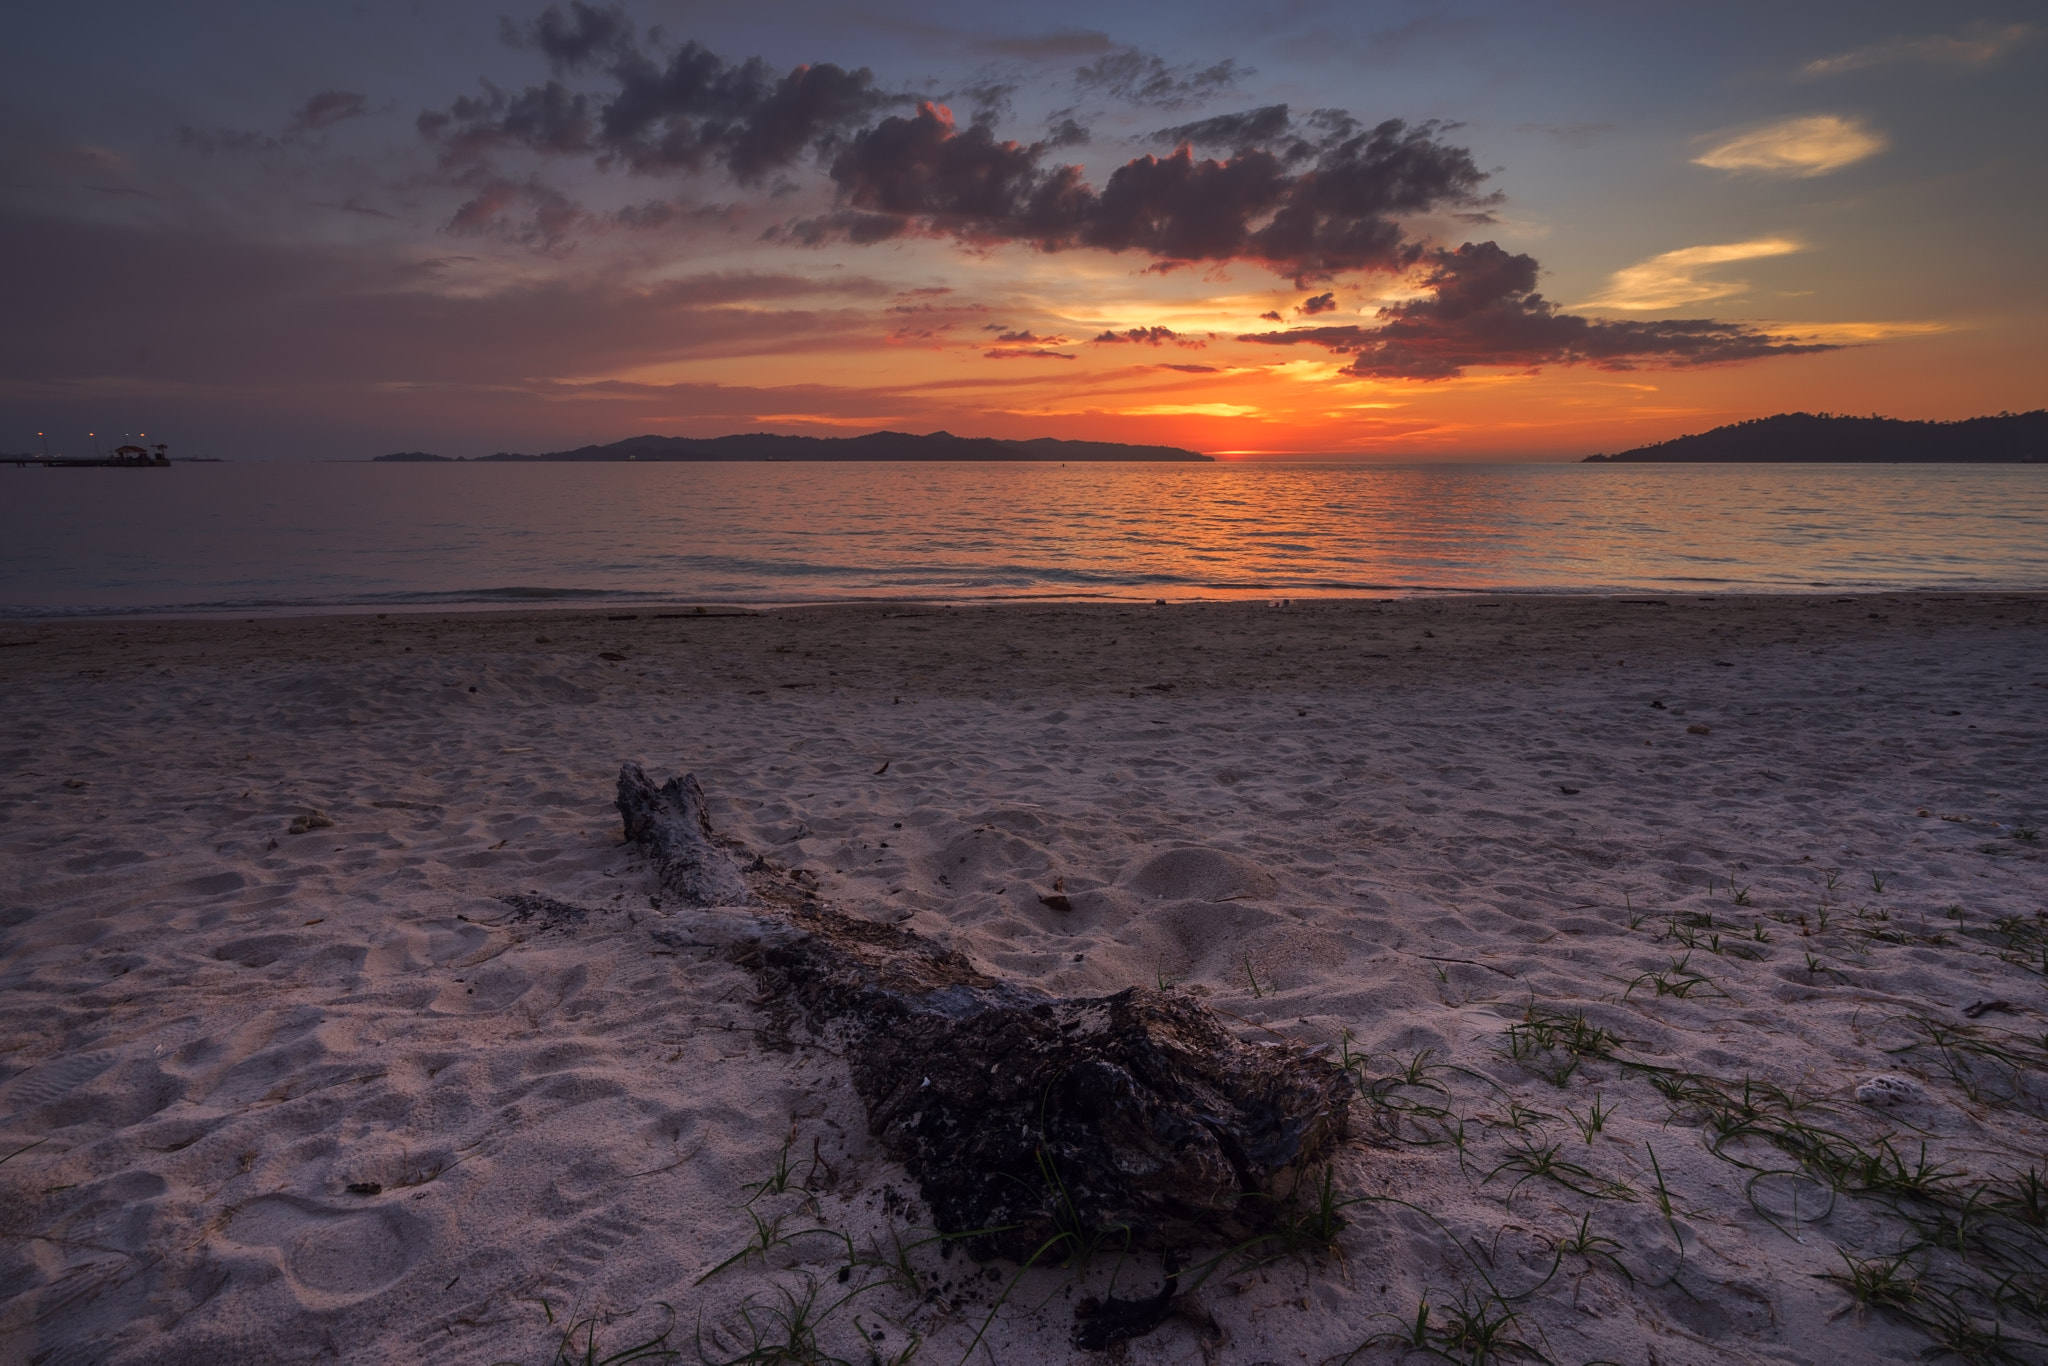 Sony a7 sample photo. Sunset at odec photography